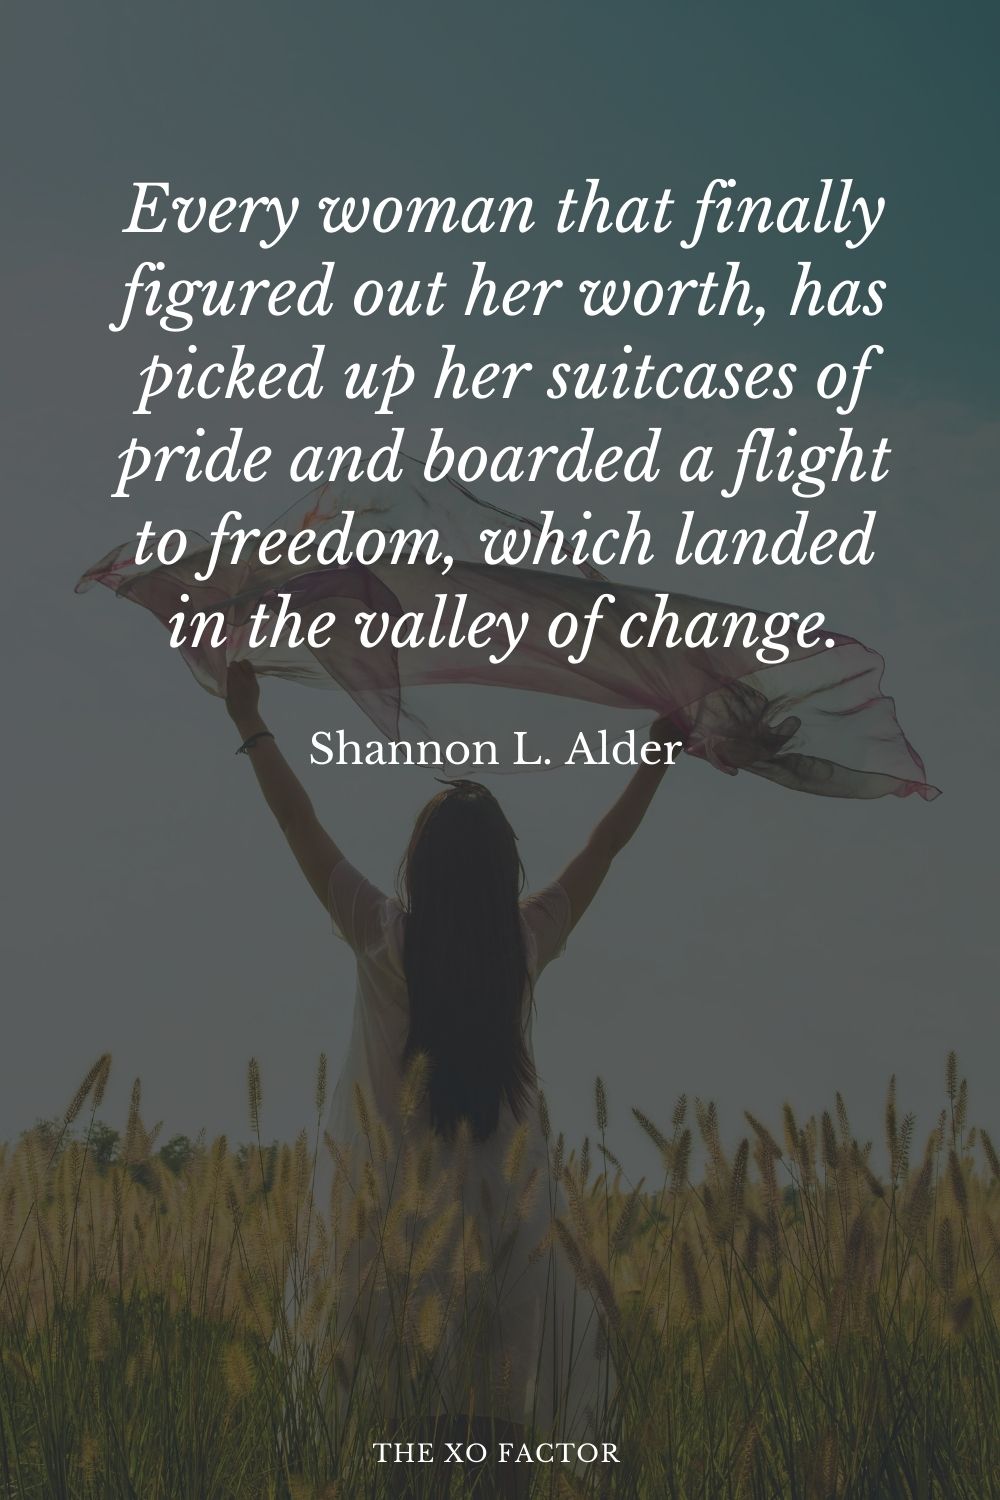 Every woman that finally figured out her worth, has picked up her suitcases of pride and boarded a flight to freedom, which landed in the valley of change.” Shannon L. Alder